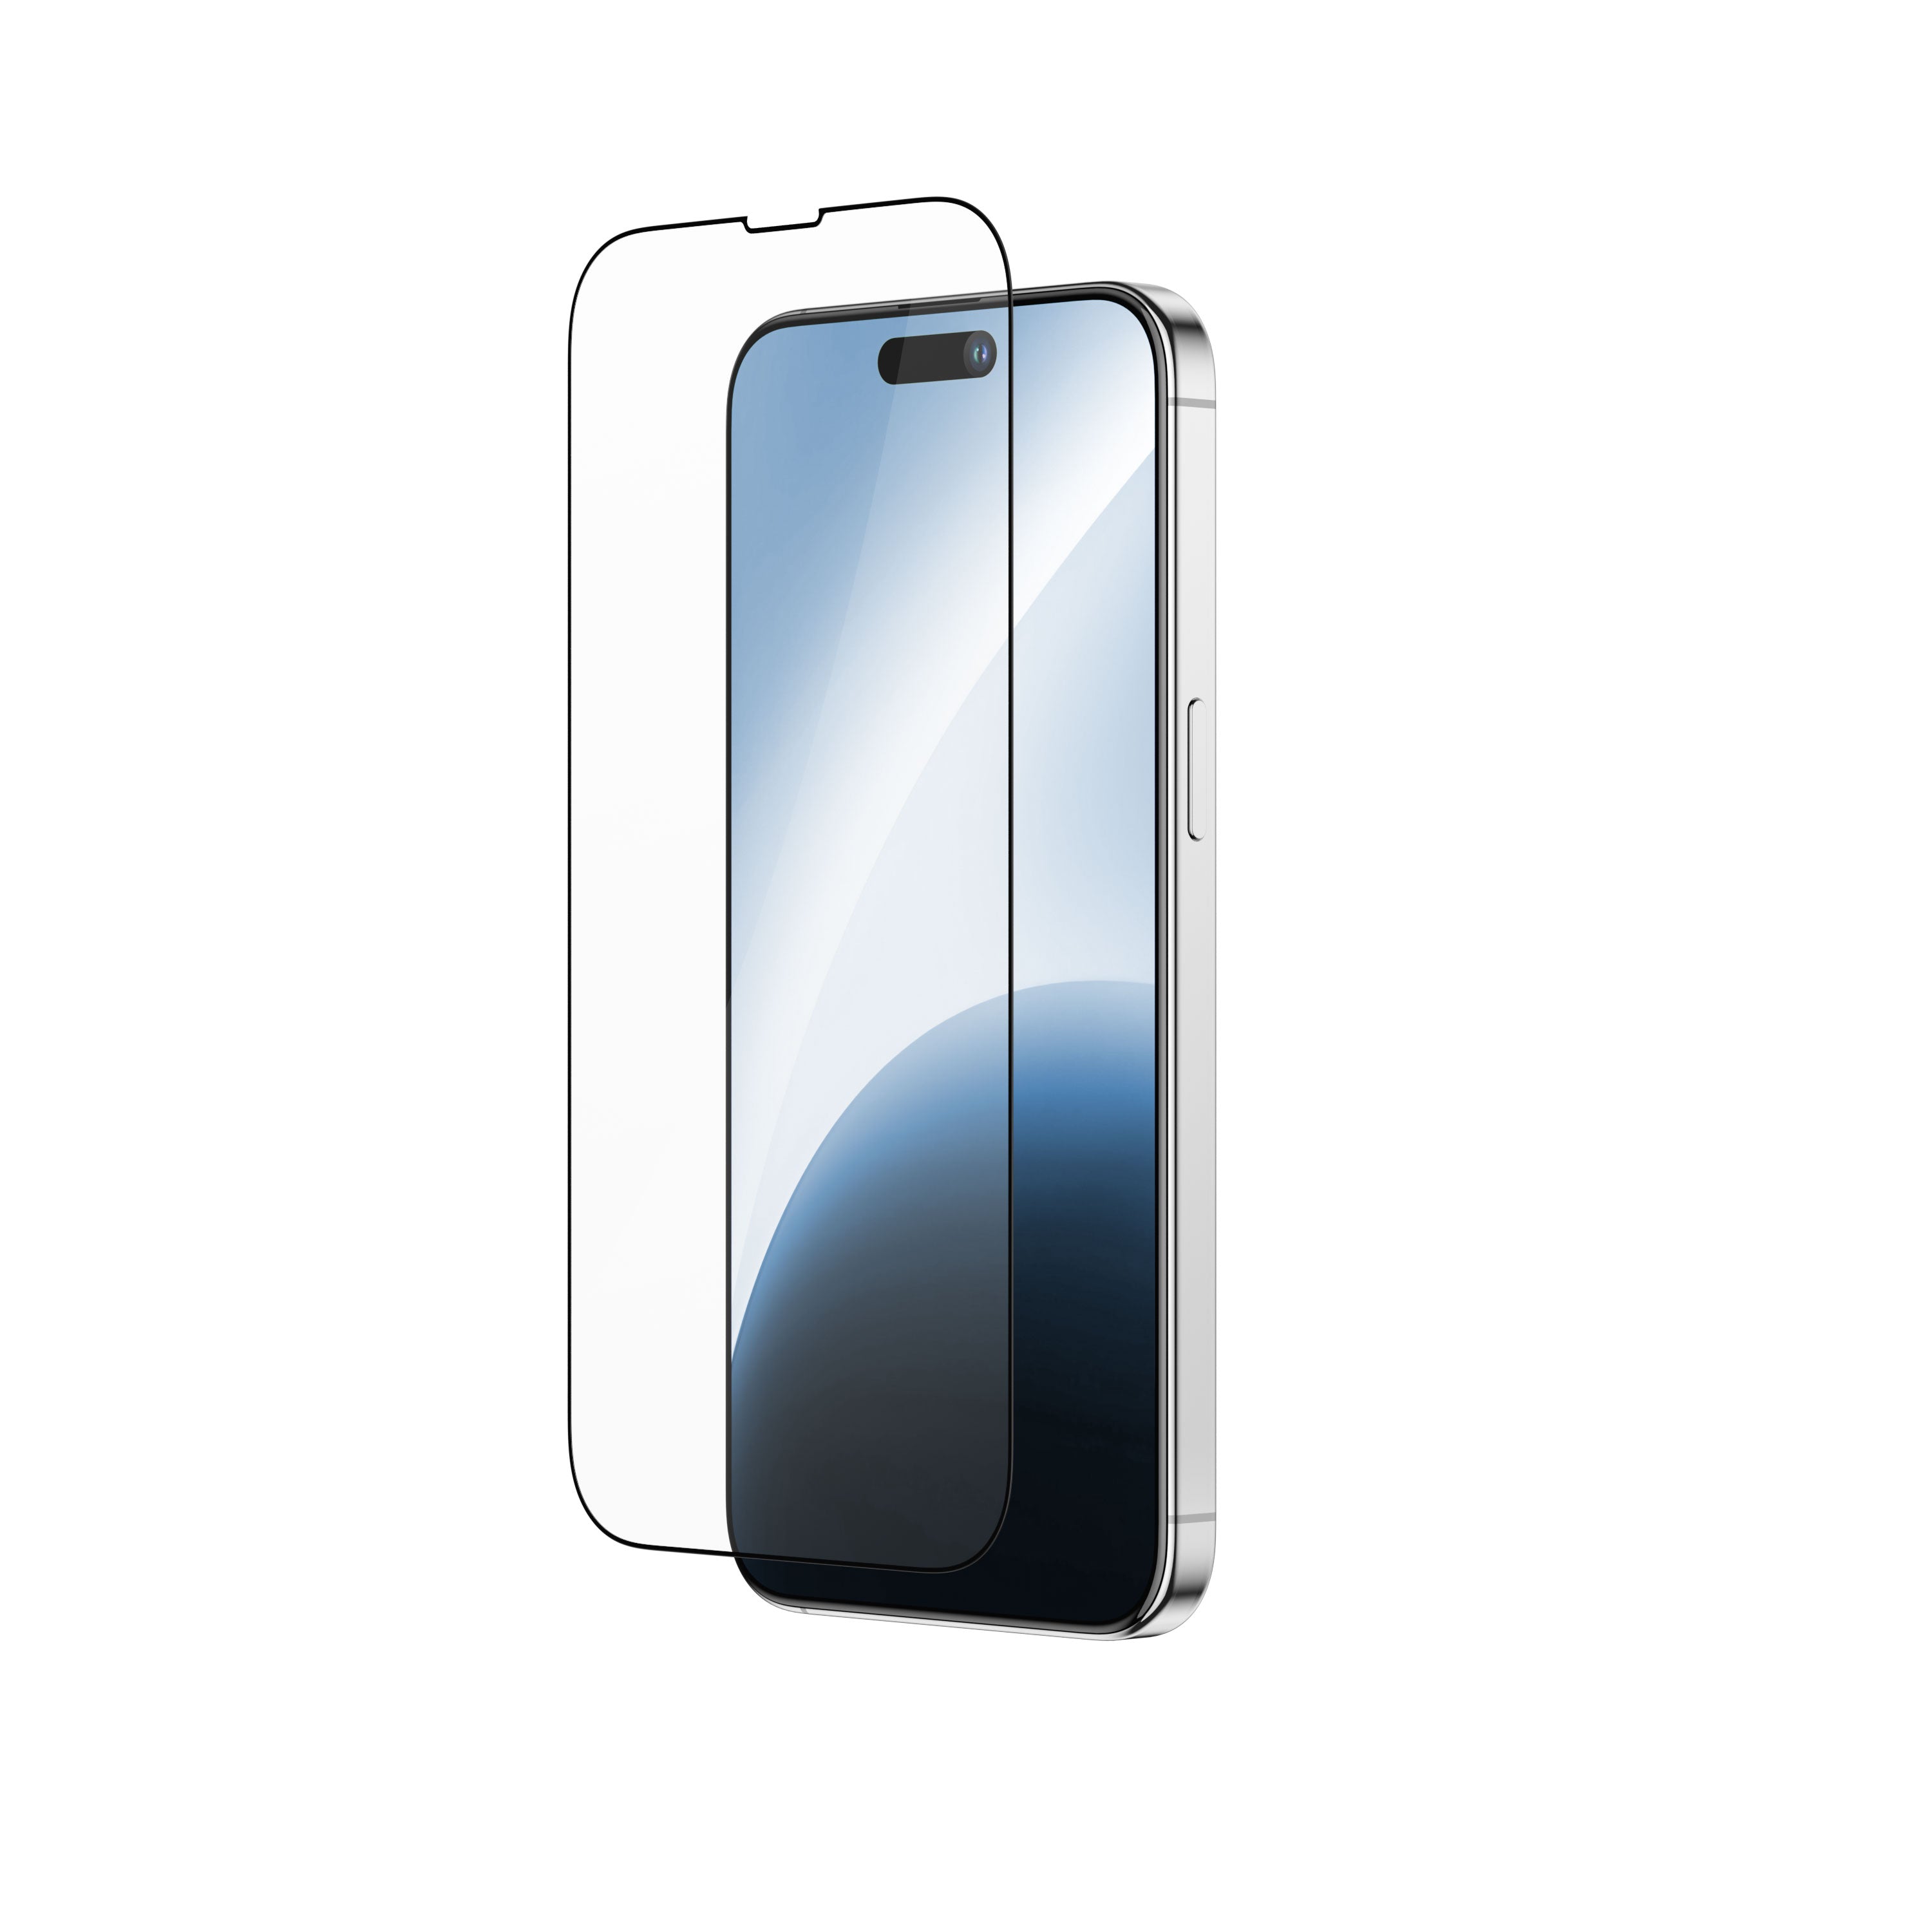 Anker KARAPAX iPhone X Screen Protector GlassGuard for iPhone X / 10 (2017)  with DoubleDefence Technology and Tempered Glass price in UAE,  UAE